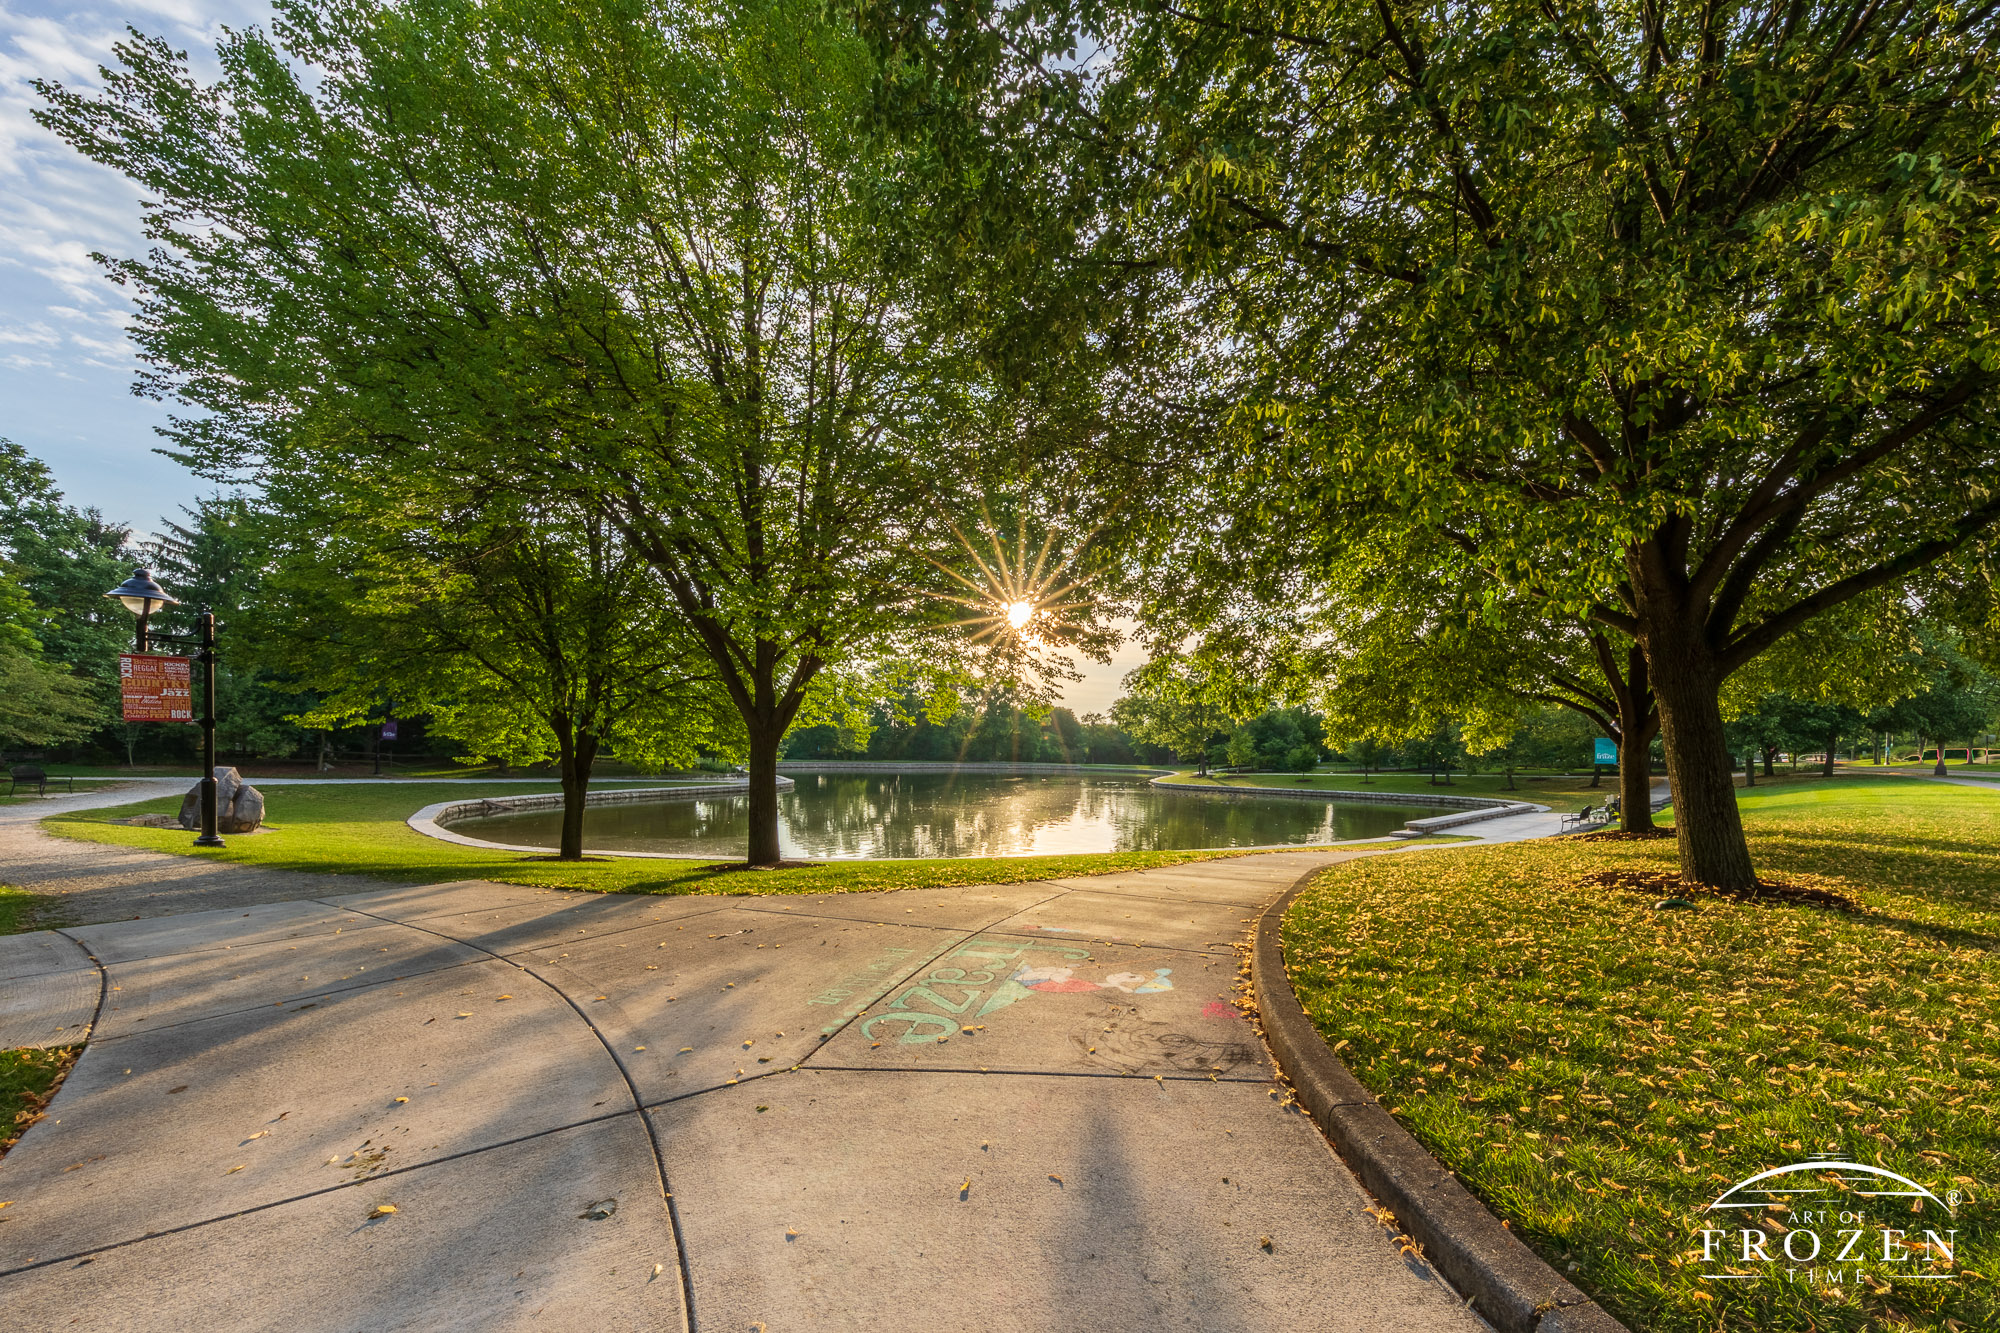 A pathway leads to a sunrise scene where the golden light illuminates Lincoln Park’s Pond and the surrounding trees filter the sunlight